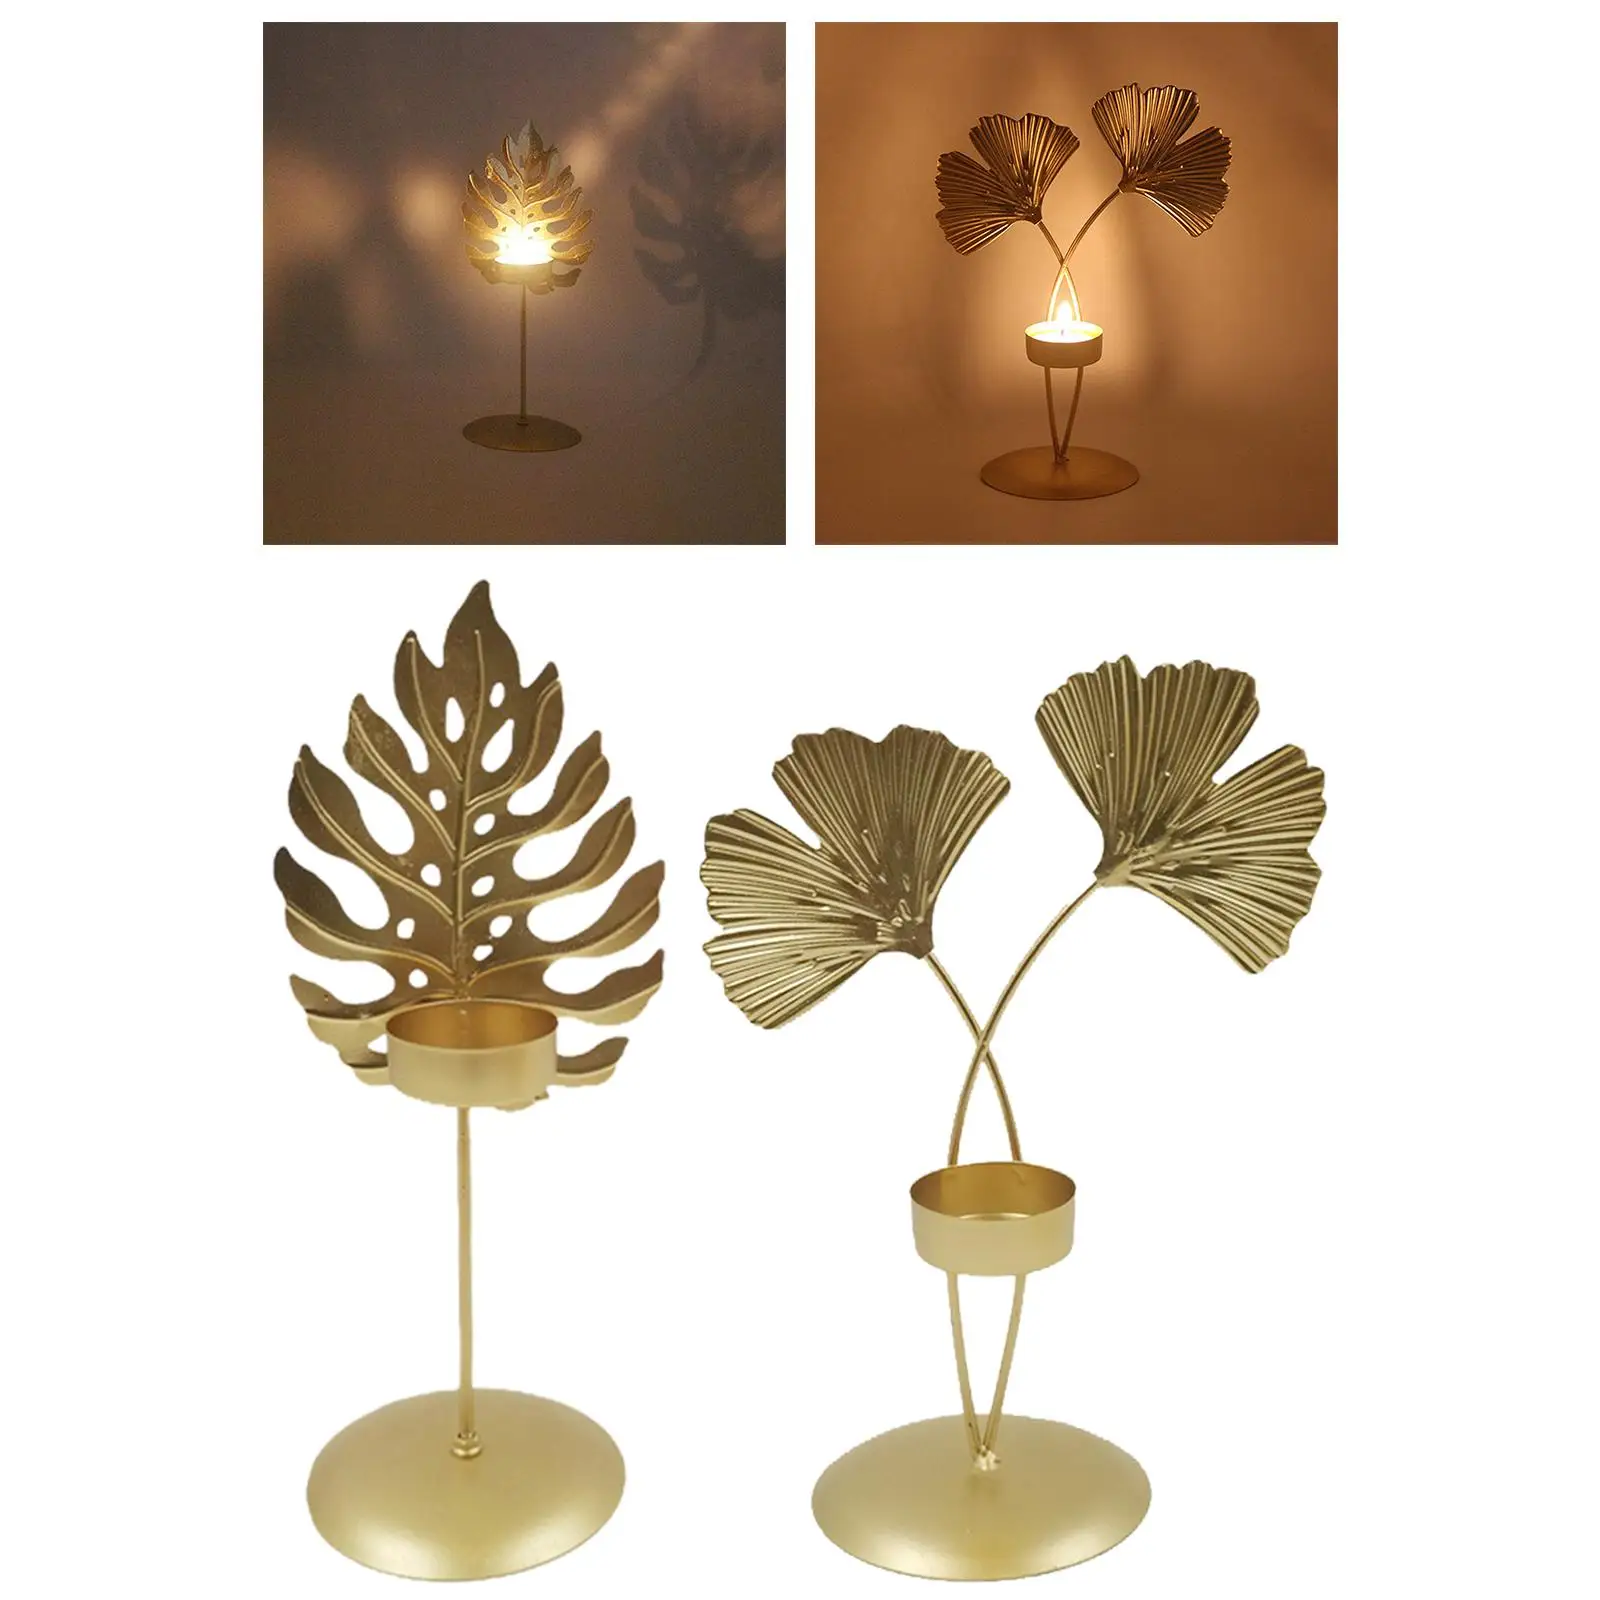 Golden Leaf Candle Holder Ornament Stick Holder Candlestick Crafts Centerpiece Gift for Event Wedding Table Parties Dining Table